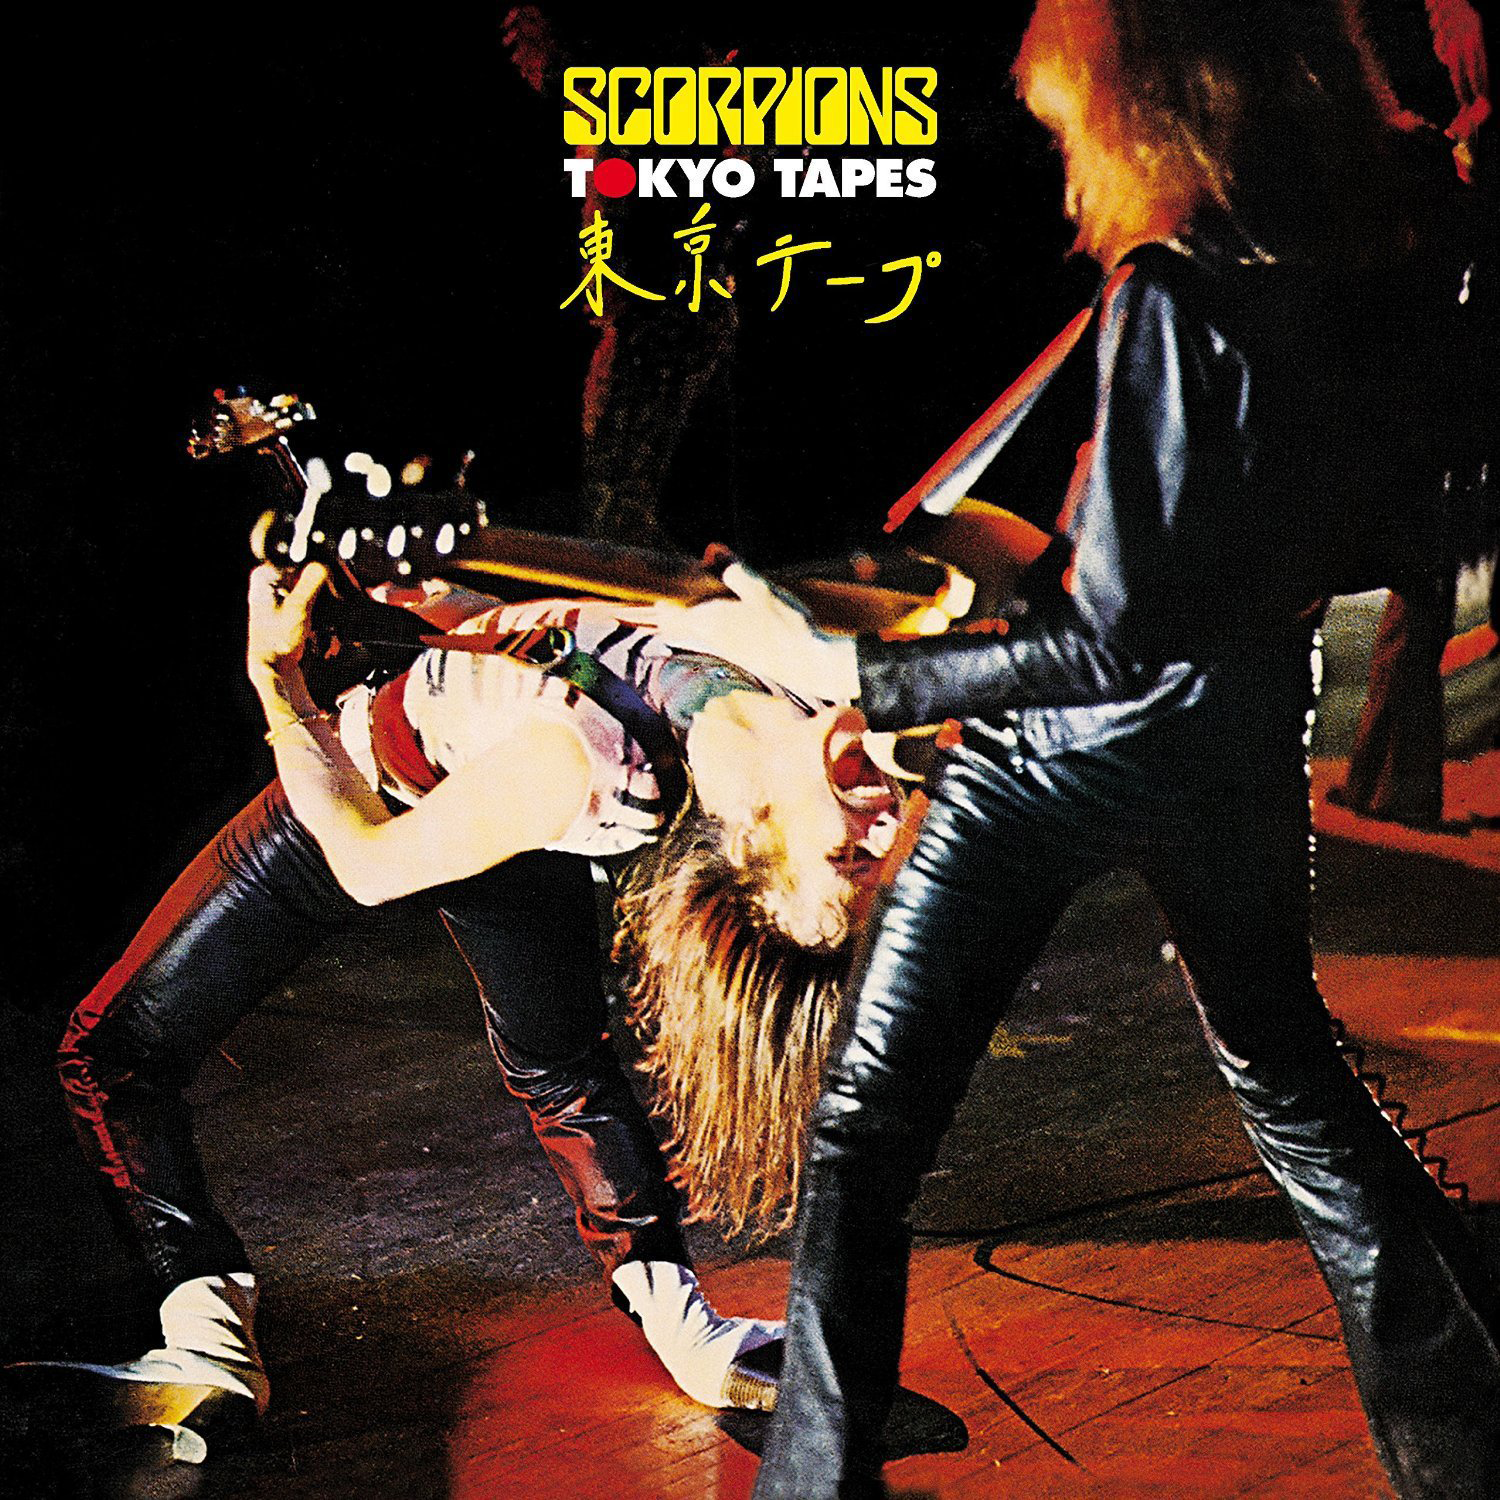 Scorpions-Tokyo Tapes-(538159542)-Reissue Remastered Deluxe Edition-2CD-FLAC-2015-RUiL Download